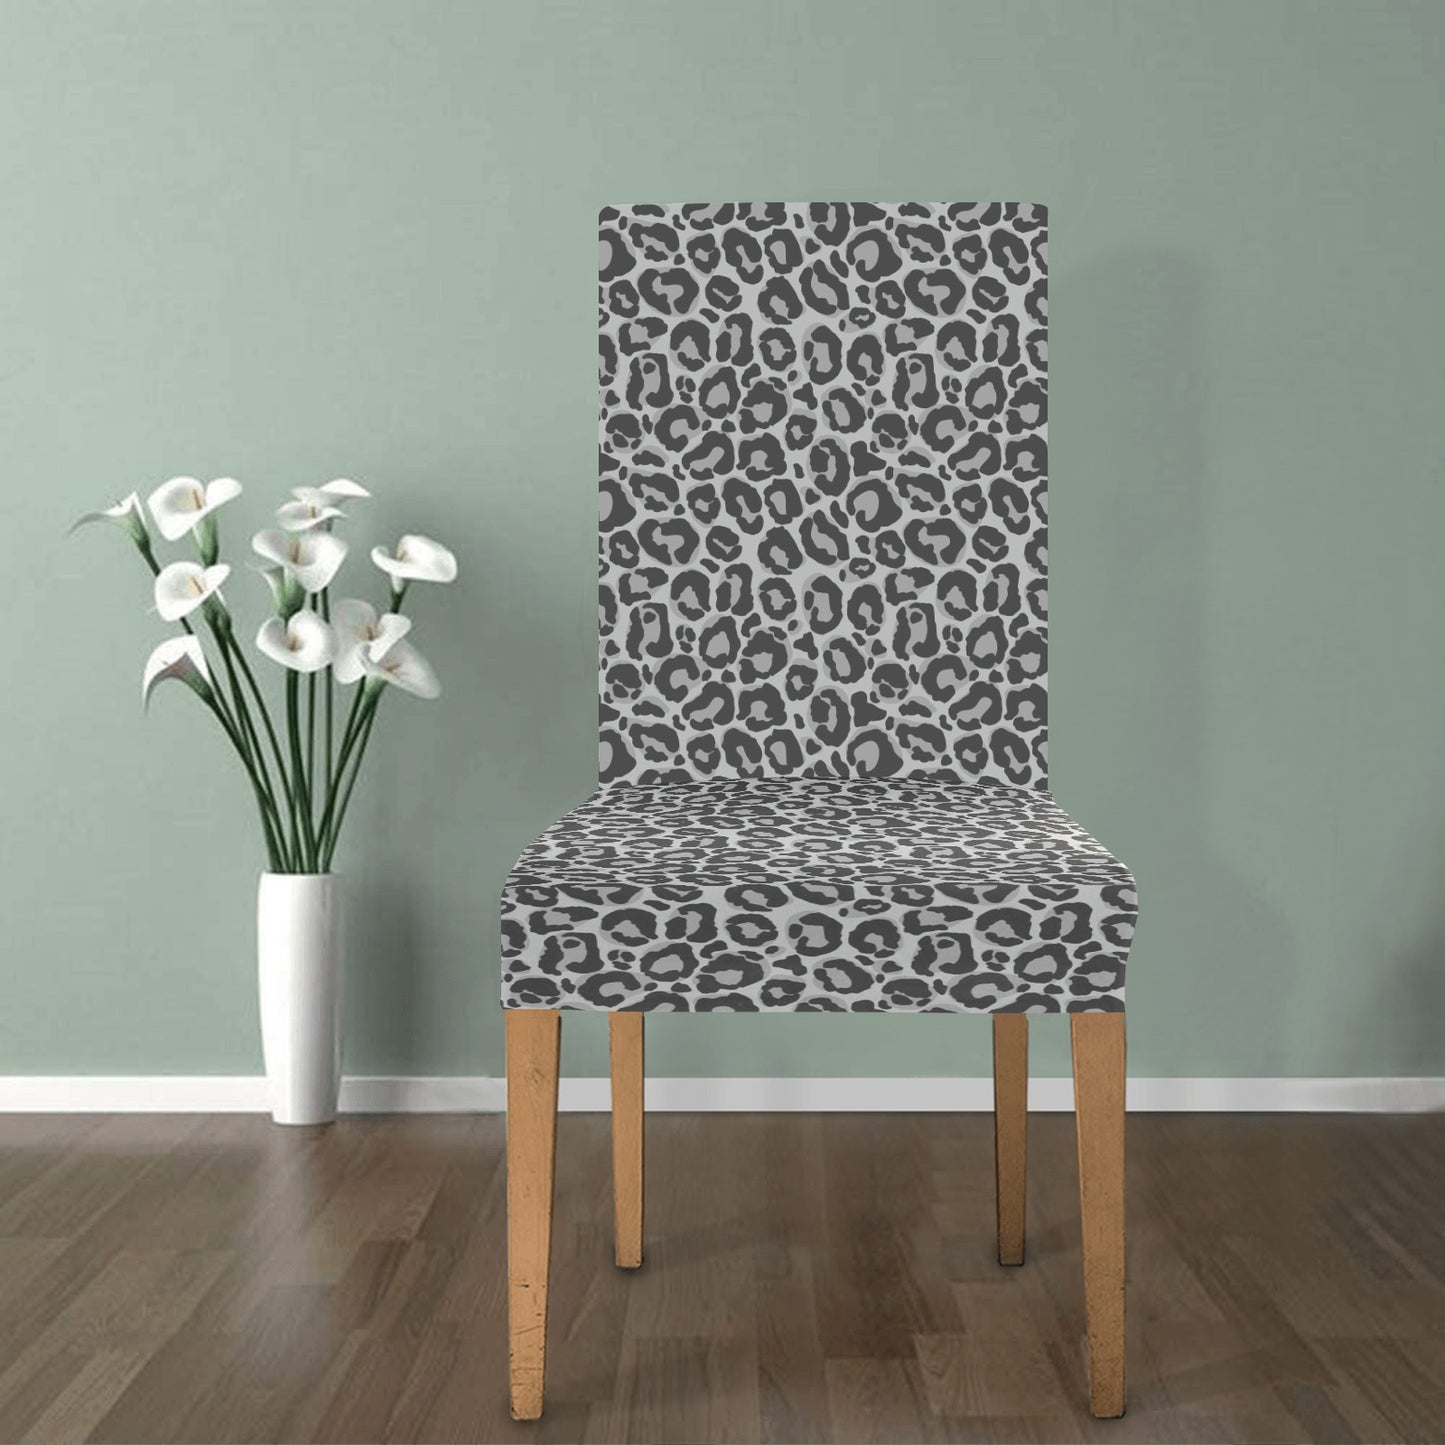 Grey Leopard Dining Chair Seat Covers, Animal Print Cheetah Stretch Slipcover Furniture Dining Room Party Banquet Home Decor Starcove Fashion